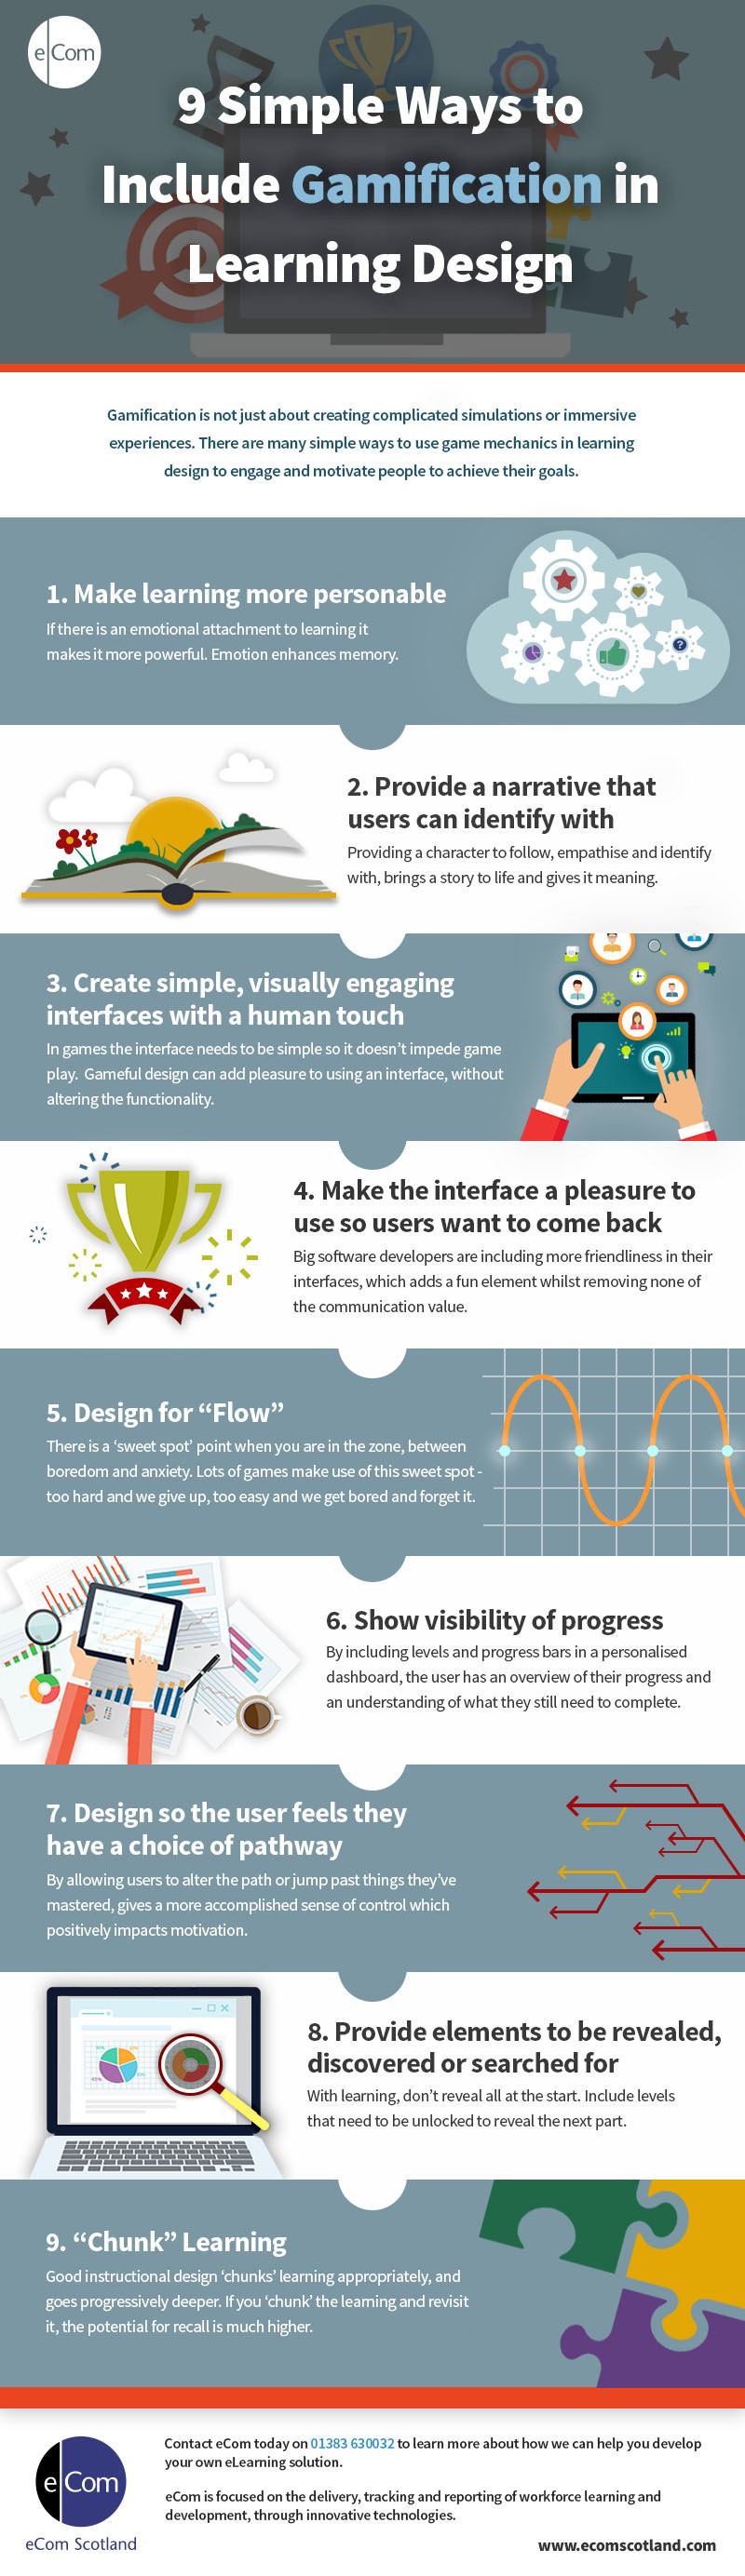 9 Ways to Include Gamification in Learning Design Infographic